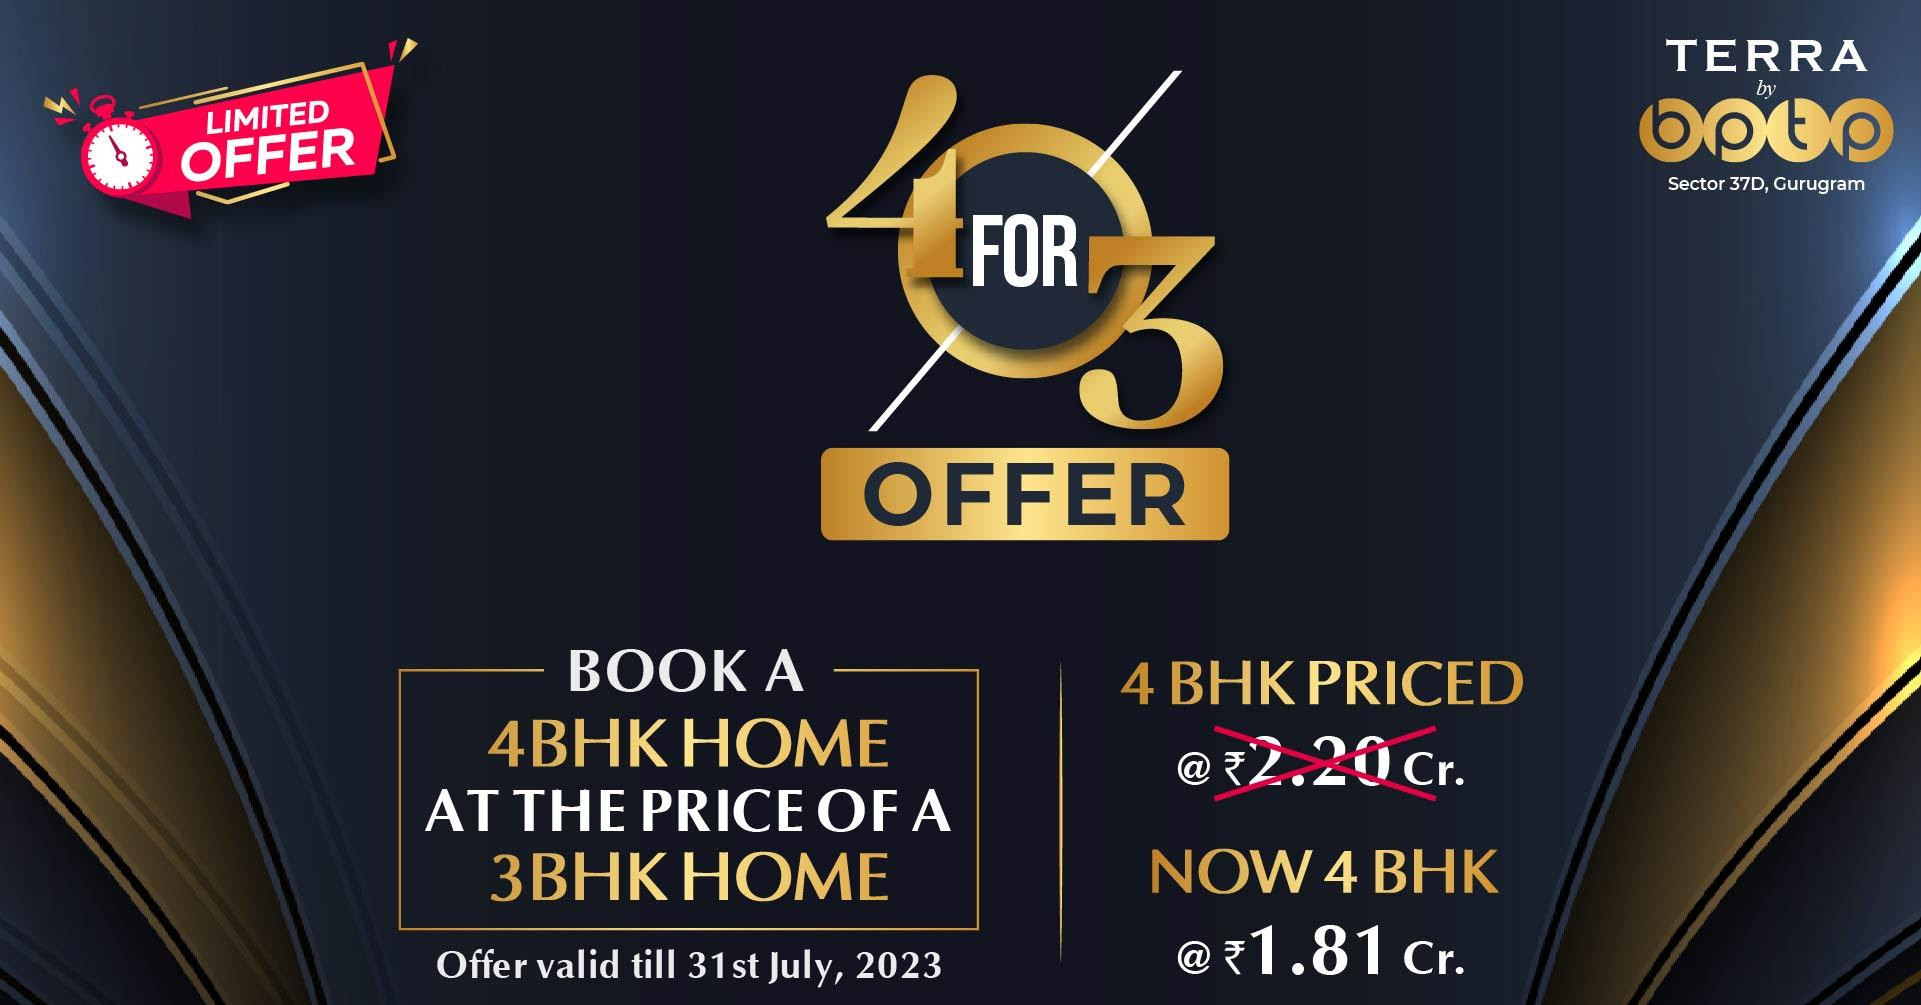 Book 4 BHK home and price of a 3 BHK at BPTP Terra, Sector 37D, Gurgaon